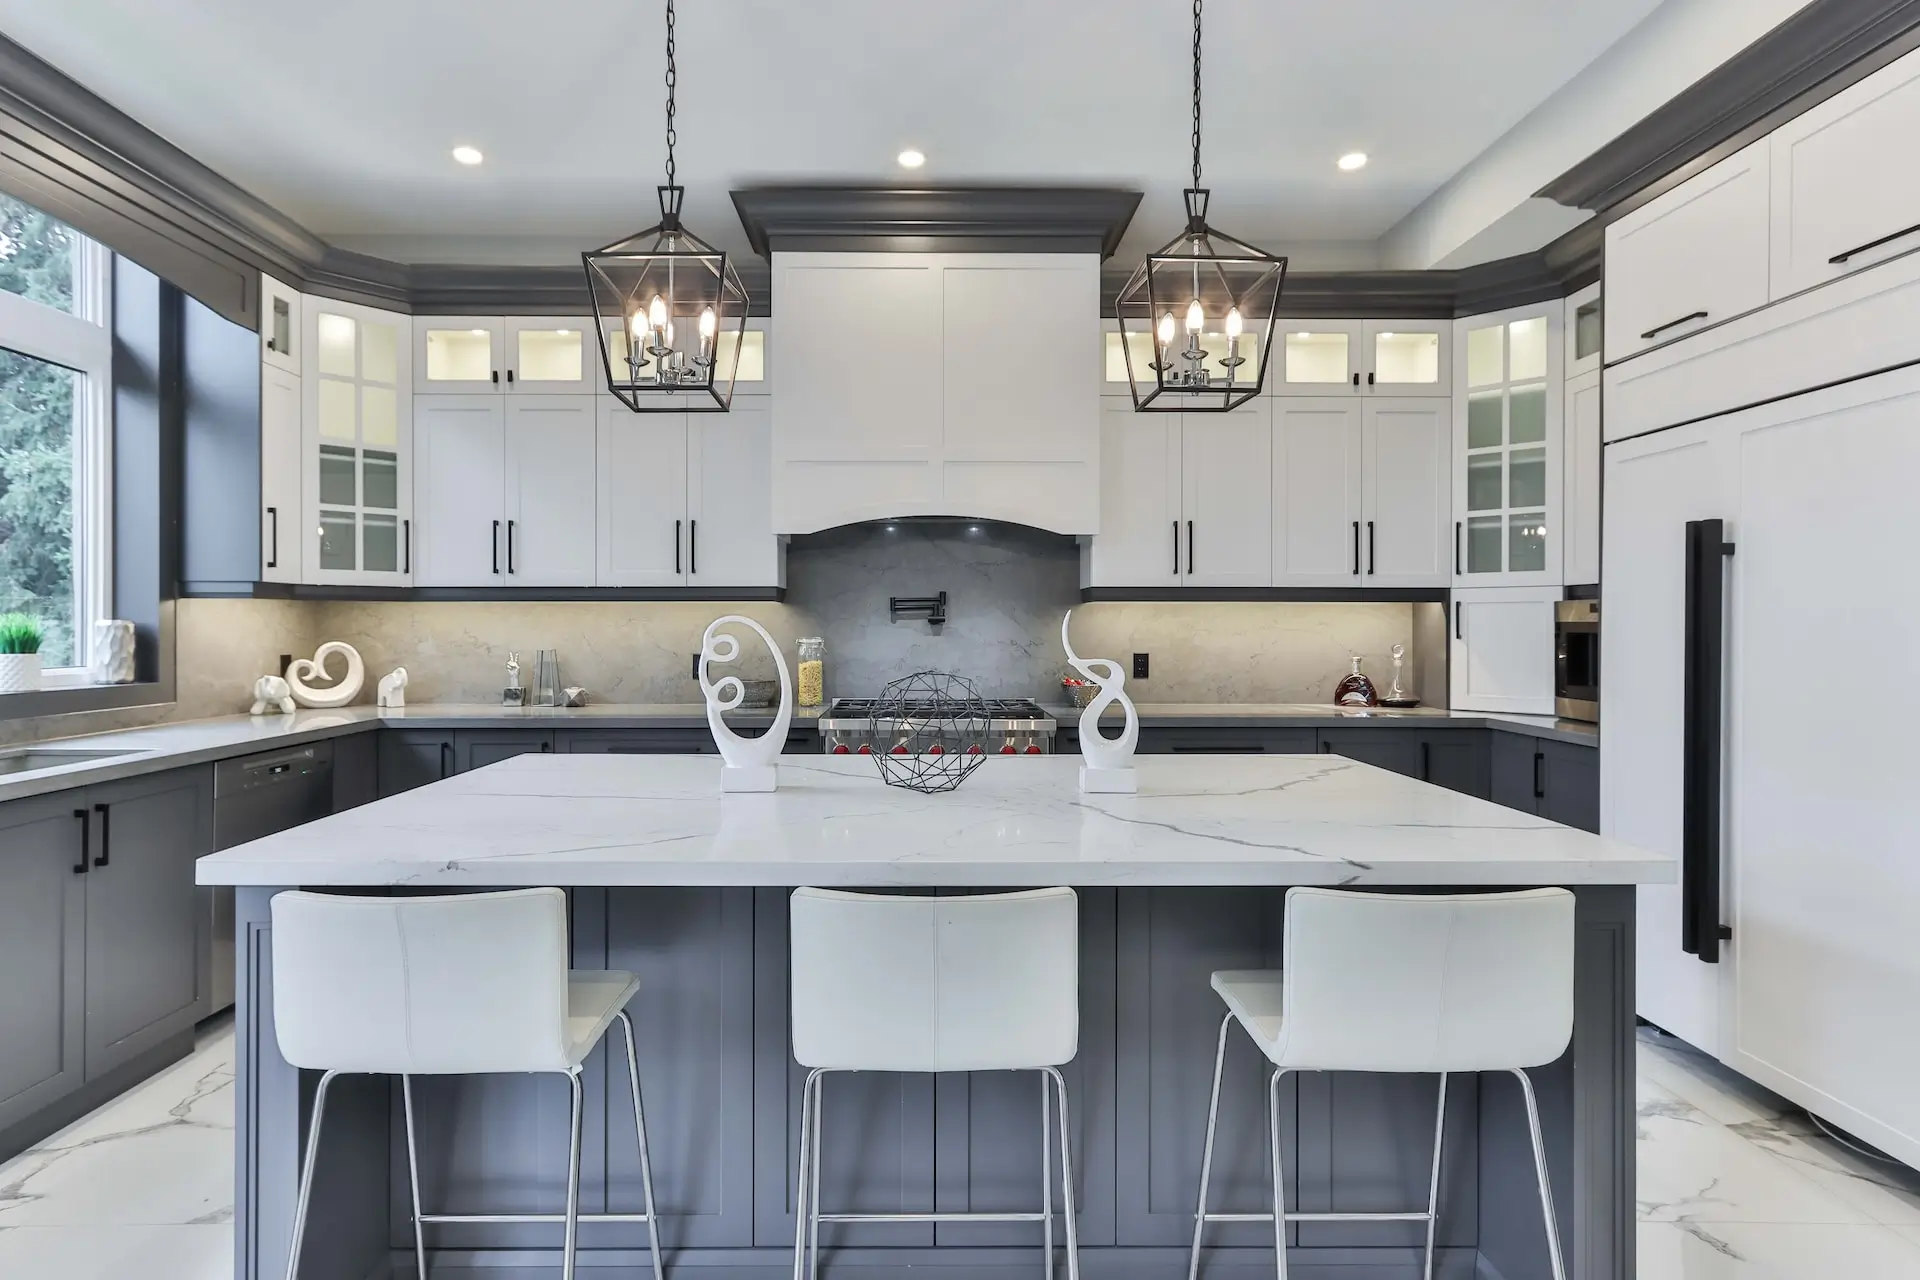 Kitchen Remodel New Orleans - An image of a modern kitchen with a custom white fridge with black handles, custom island in an off-grey, white leather upholstered stools, custom concrete backsplash, custom cabinets with glass windows and interior lighting.